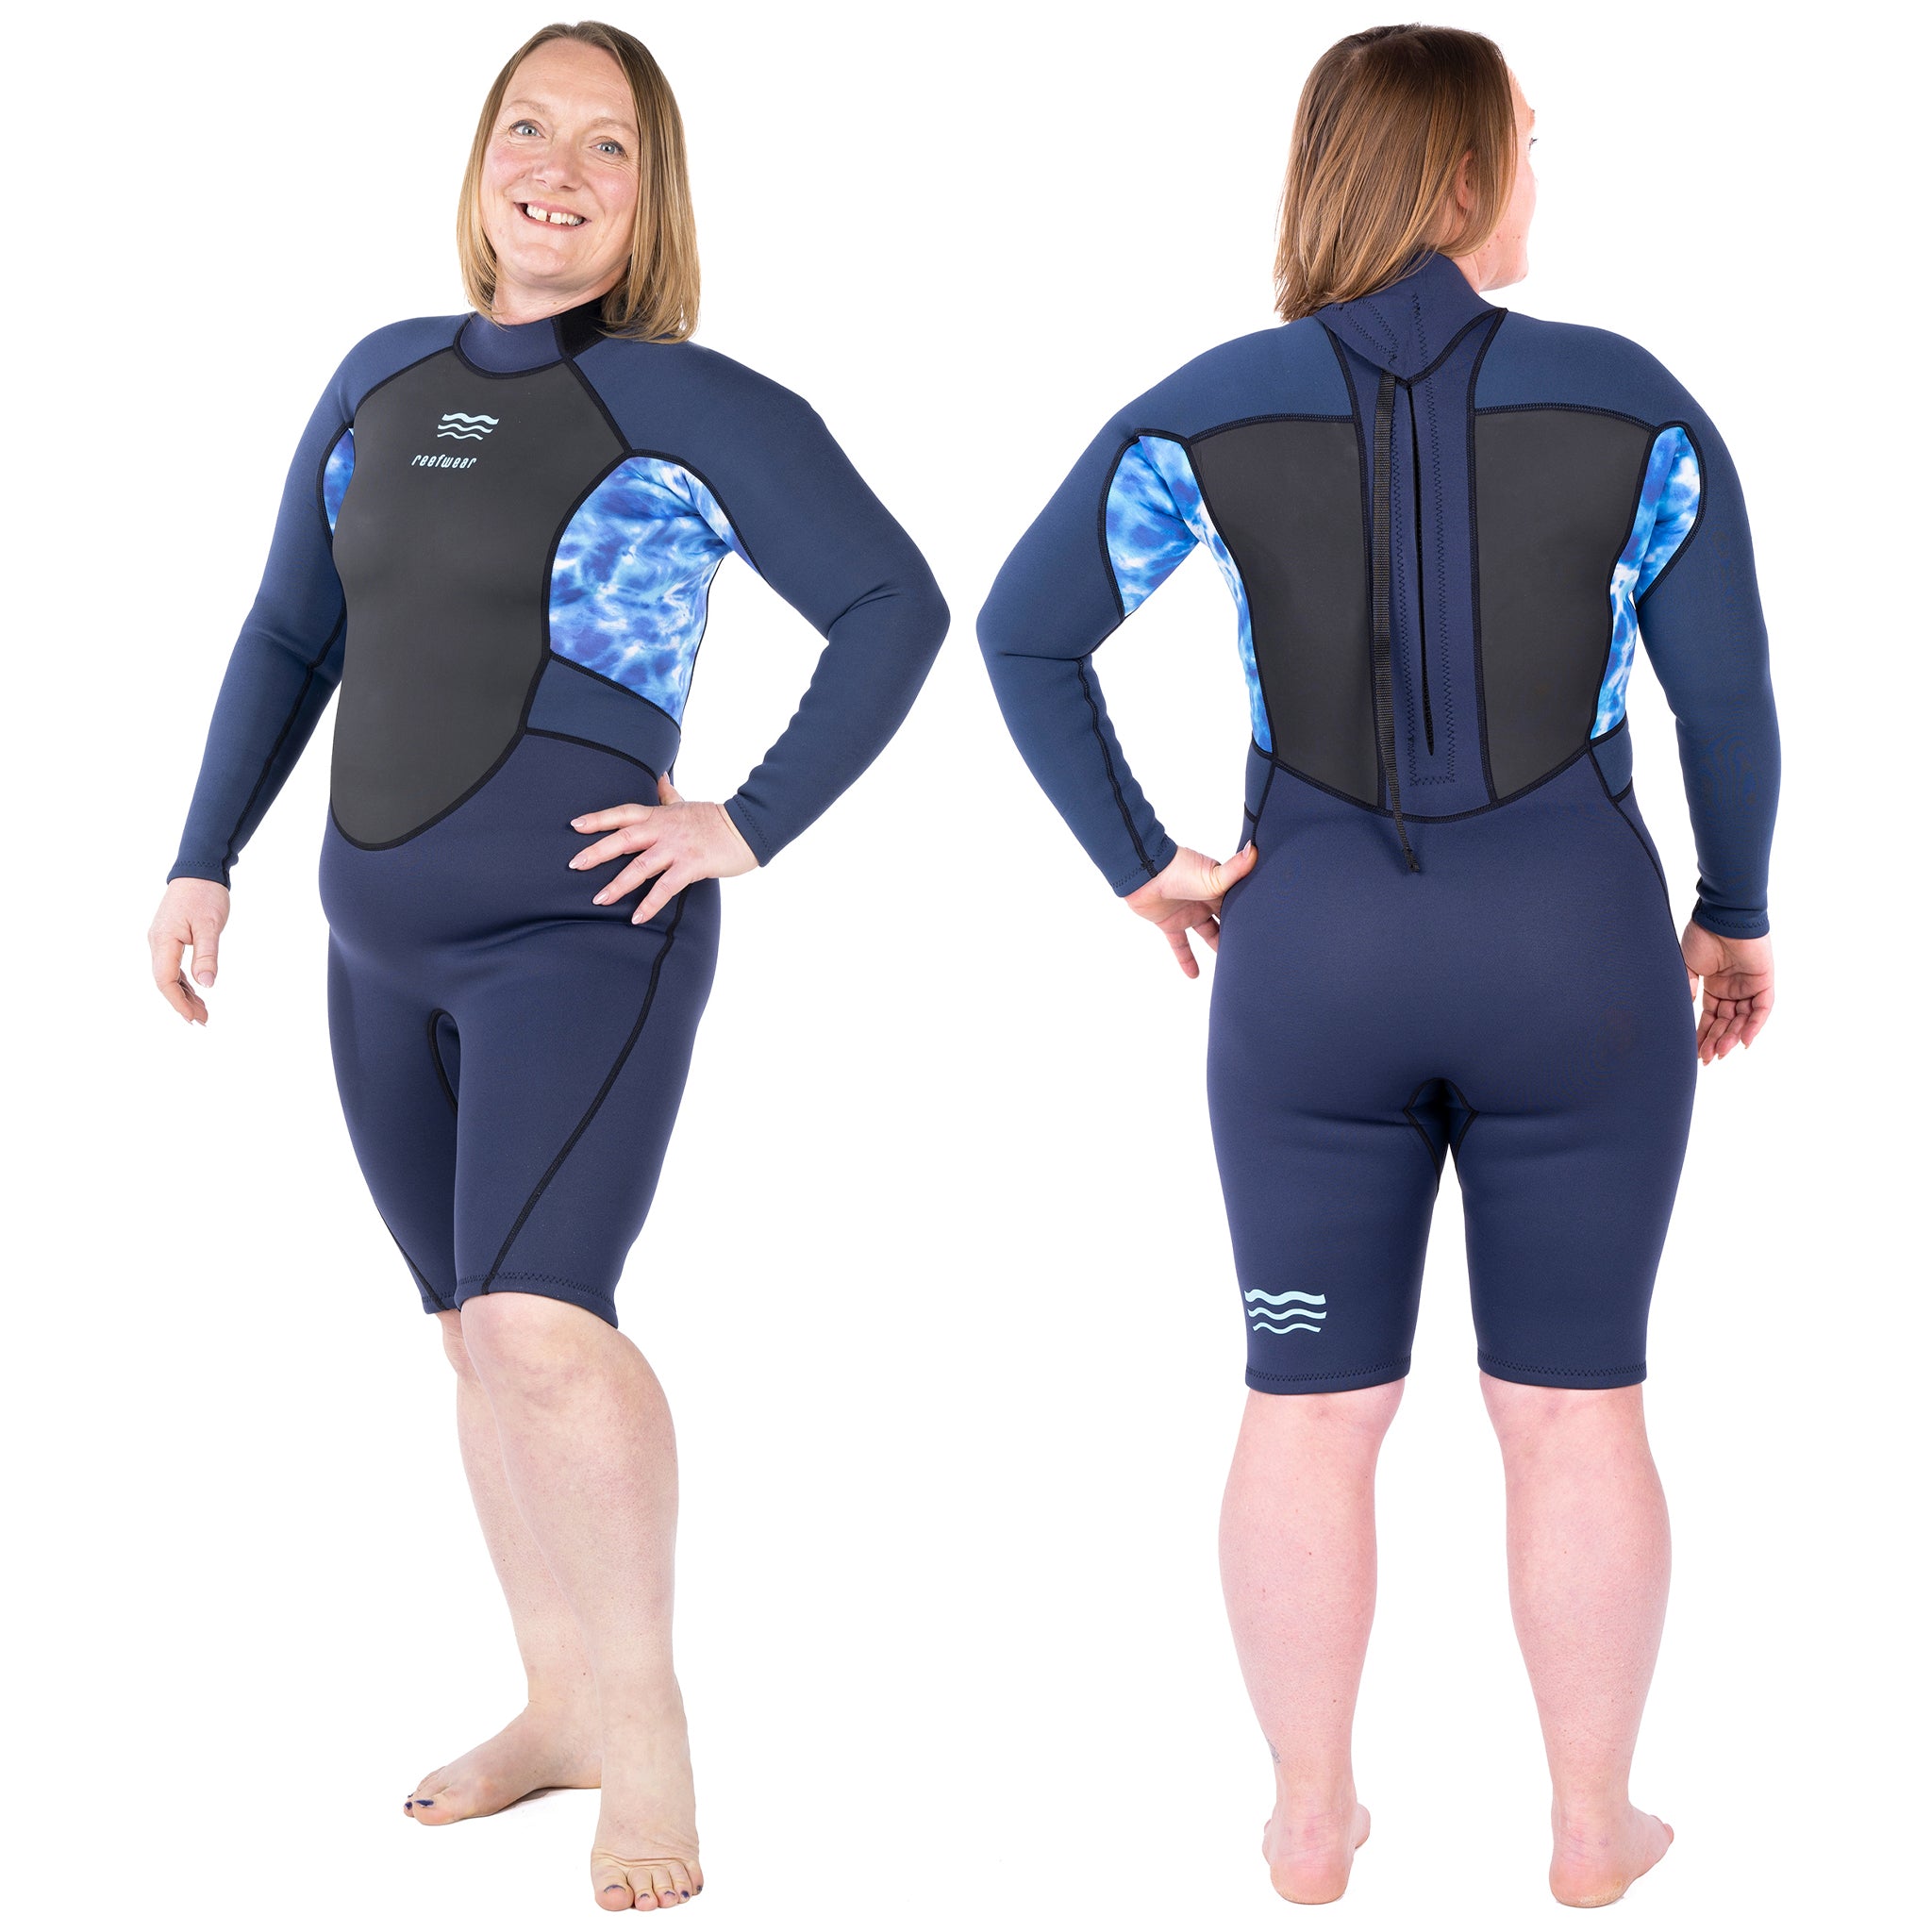 Reefwear Elise 3/2mm Women's Spring Wetsuit | Side and back view